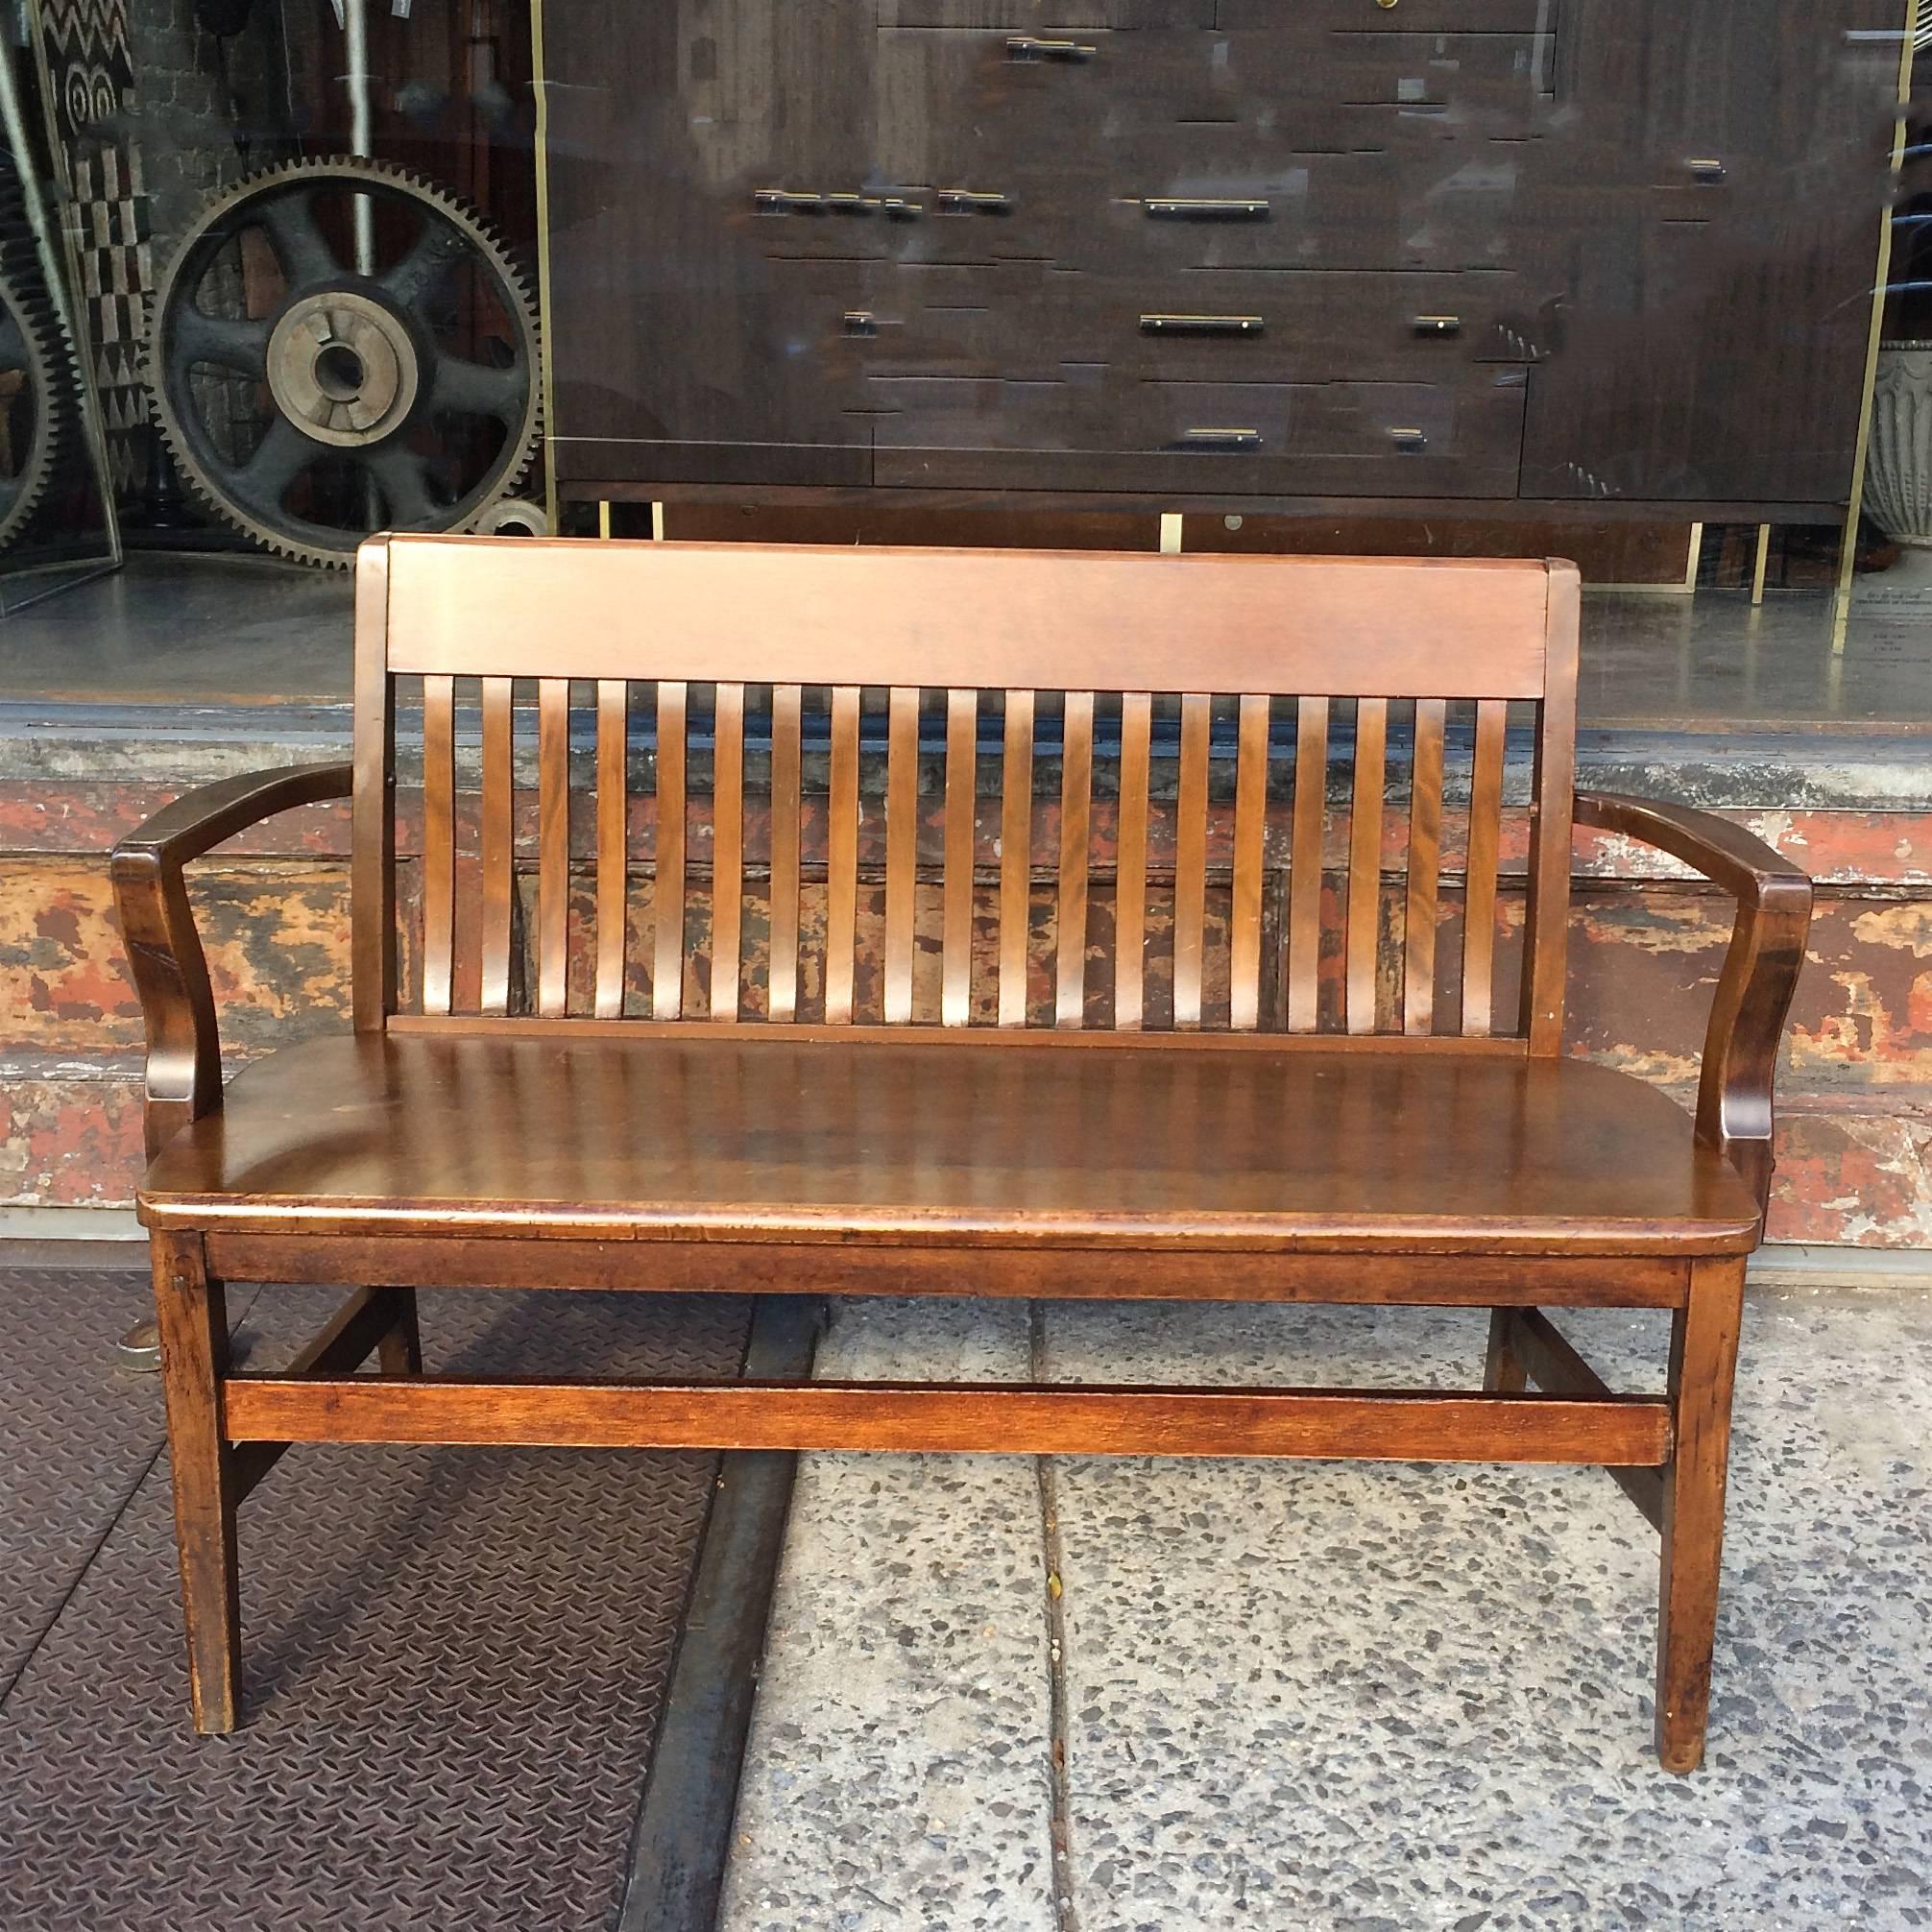 Stately and classic, 1940s, maple, courthouse bench by H & H Desk Co, Brooklyn NY